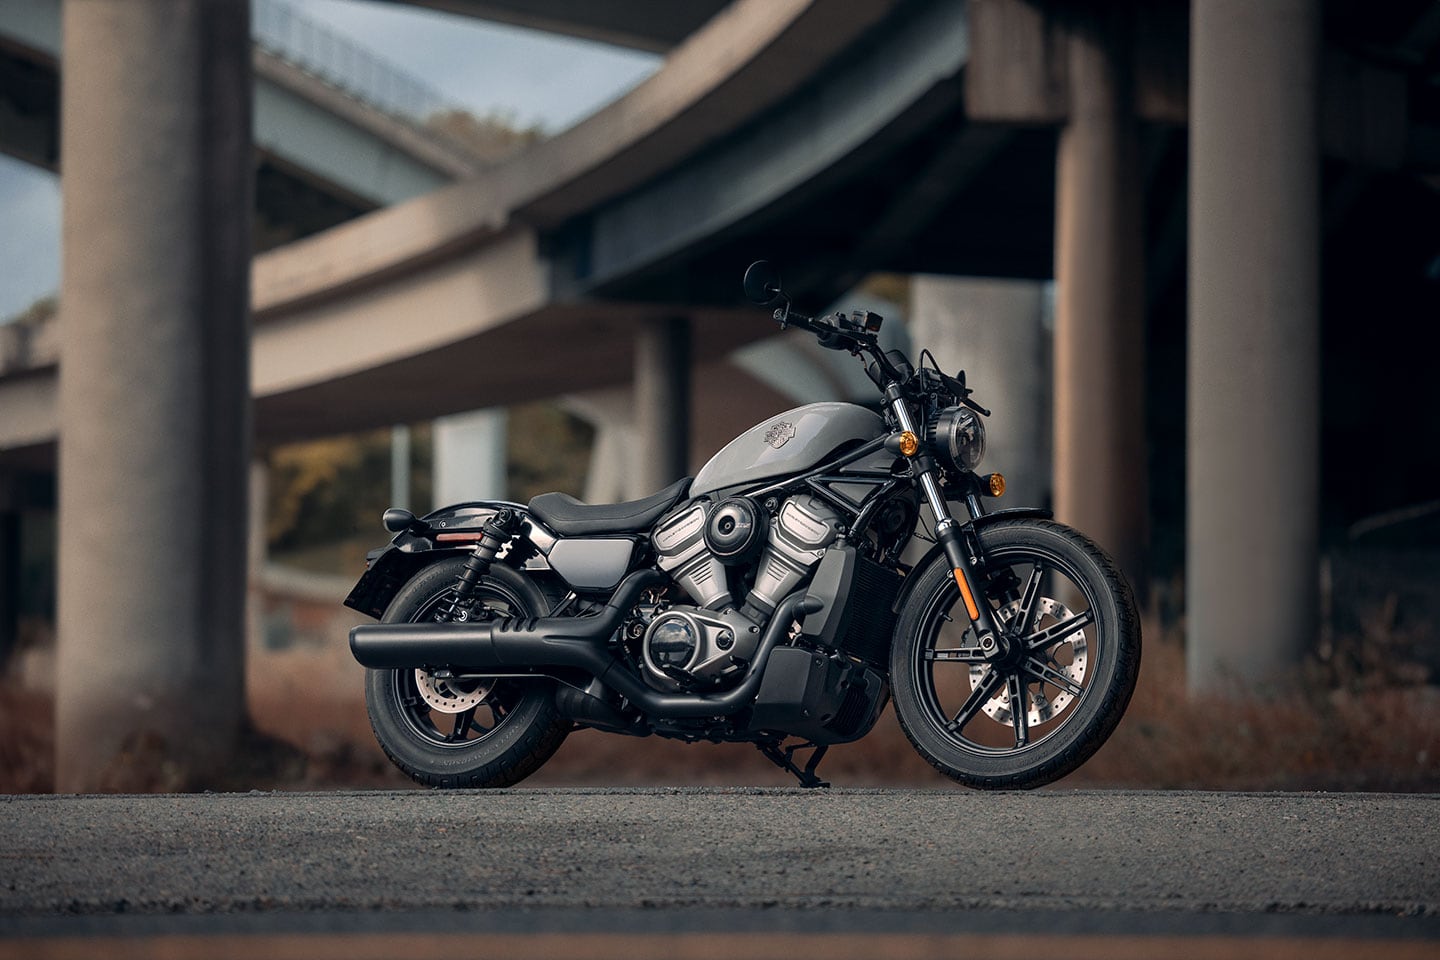 To our eyes, the steel trellis frame has a decidedly Honda Rebel 1100 look to it. Harley pretty much <i>had</i> to build a more conservatively styled Sportster, but one could argue classic H-D pillars of design have a difficult job of holding up the modern architecture.